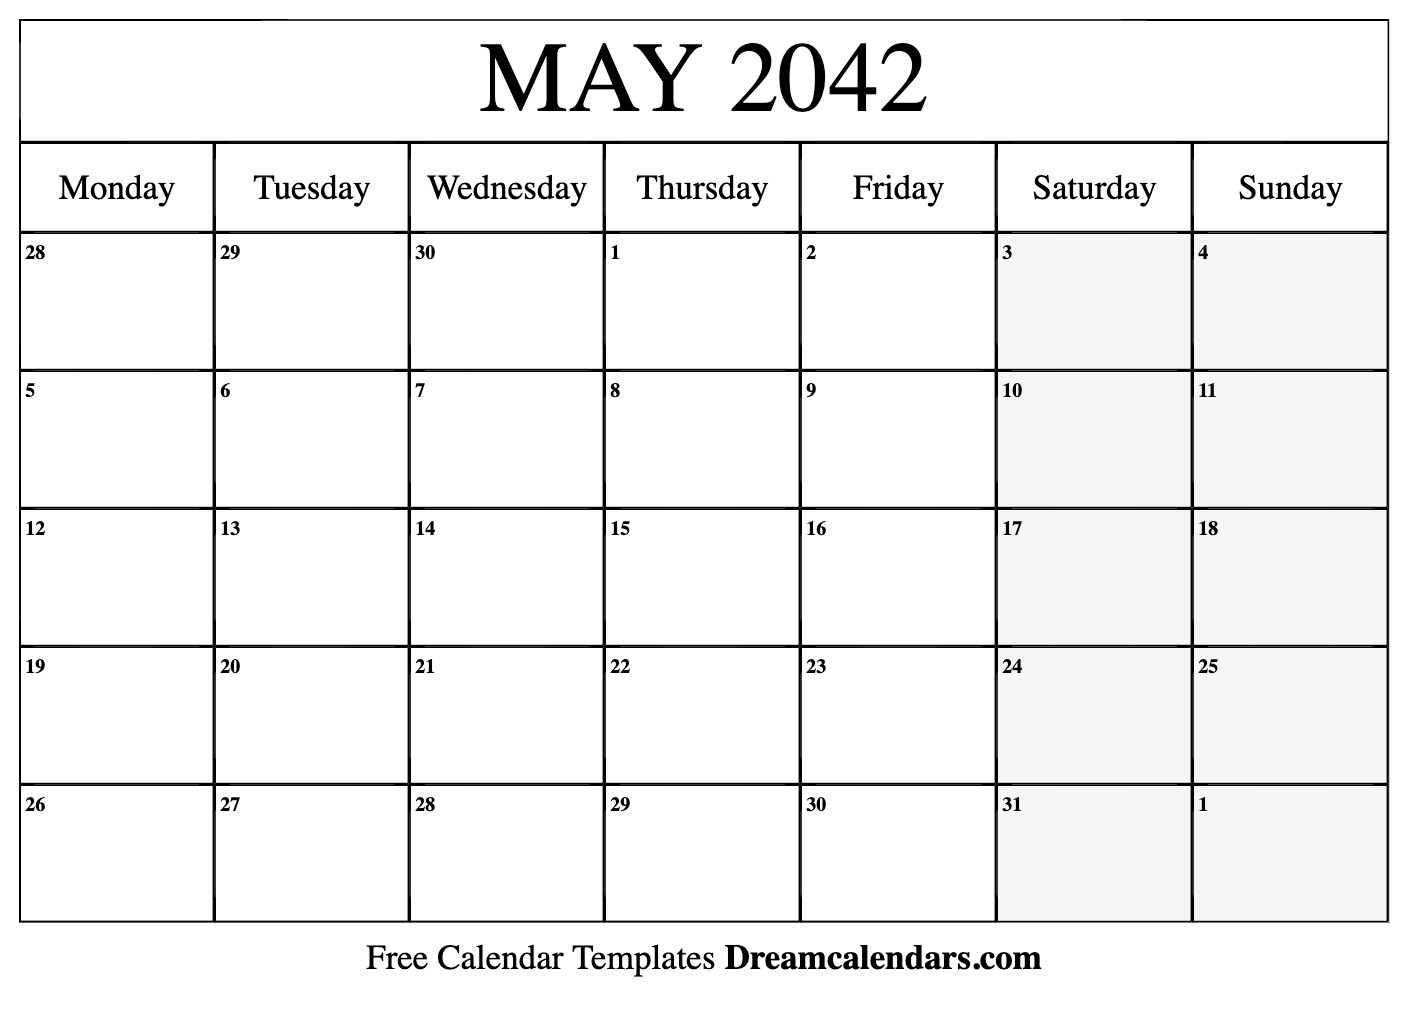 May 2042 Calendar - Free Printable with Holidays and Observances